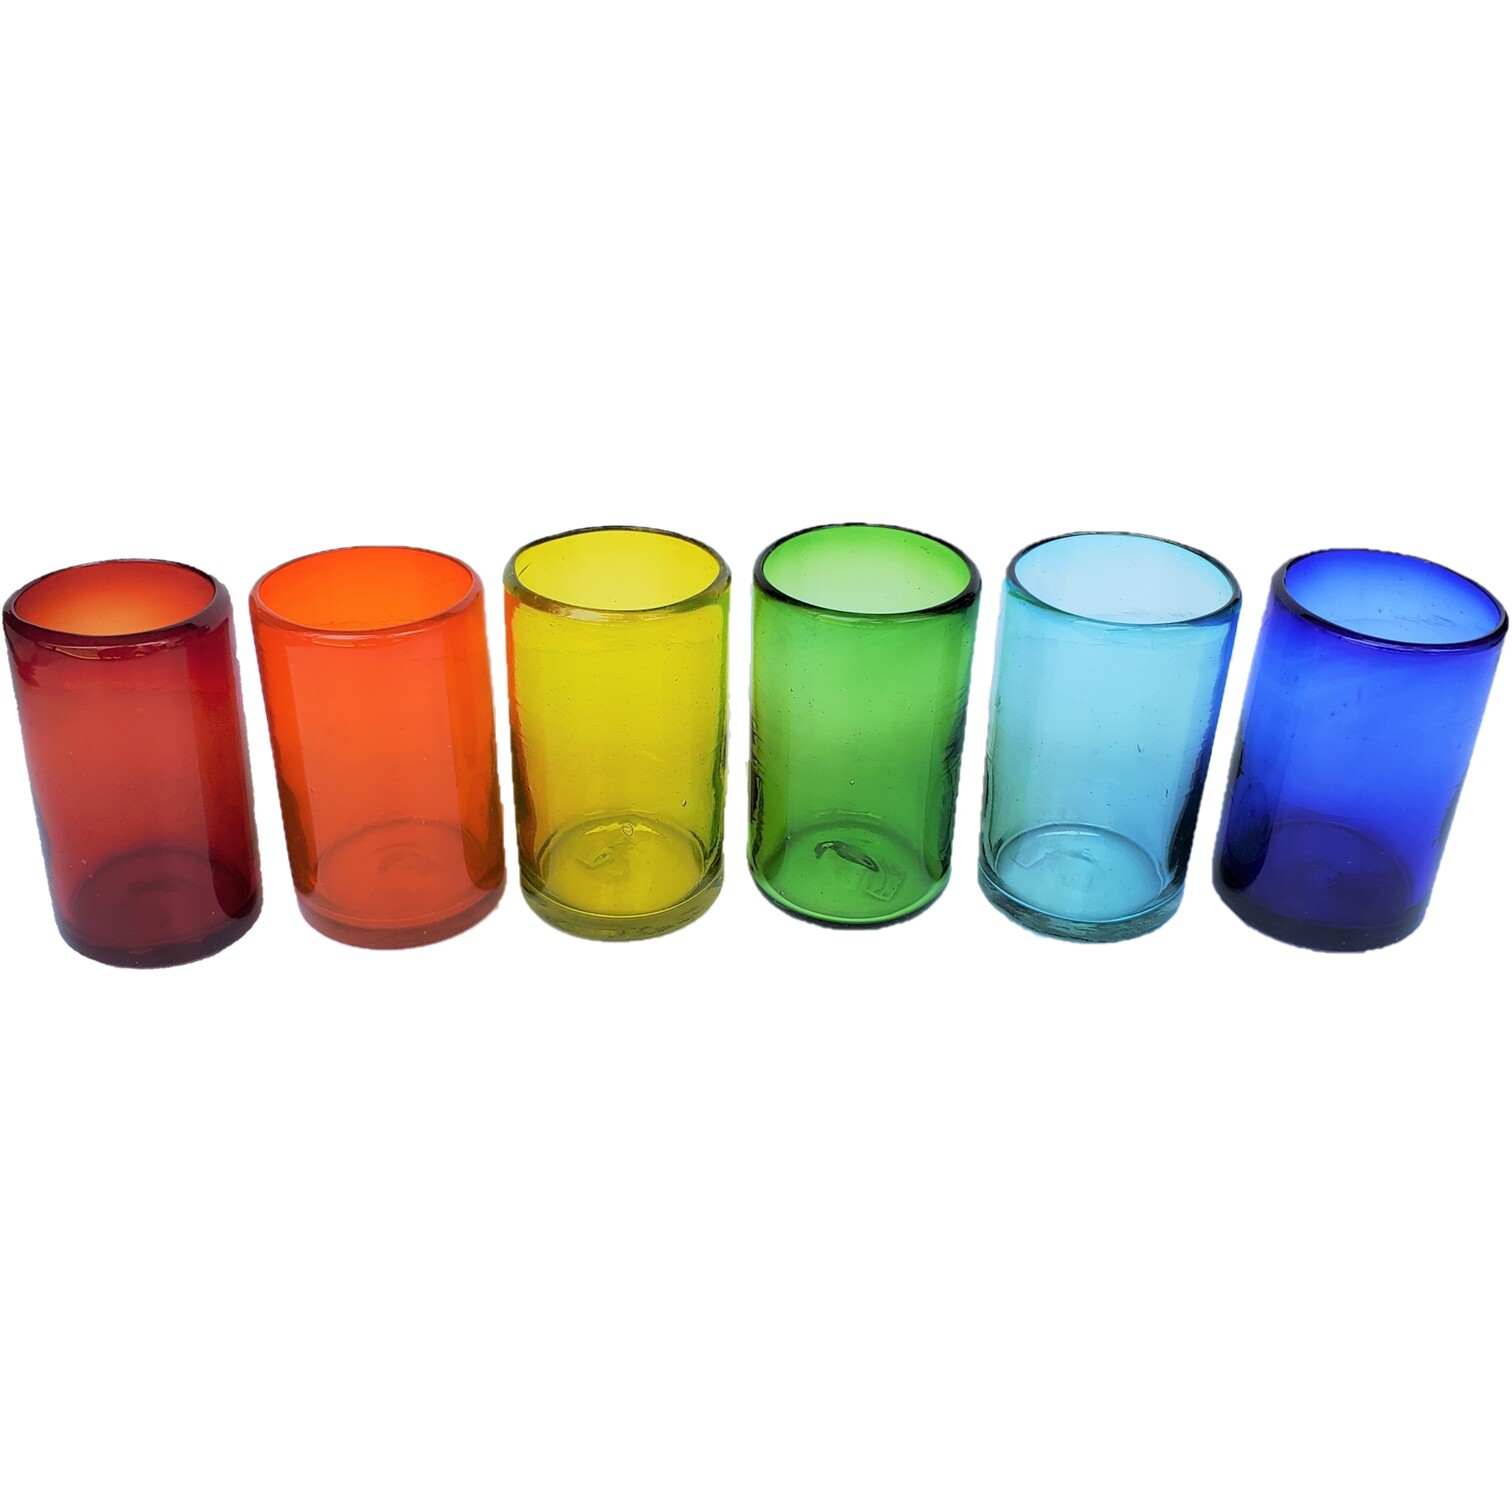 New Items / Rainbow Colored drinking glasses (set of 6) / These handcrafted glasses deliver a classic touch to your favorite drink.